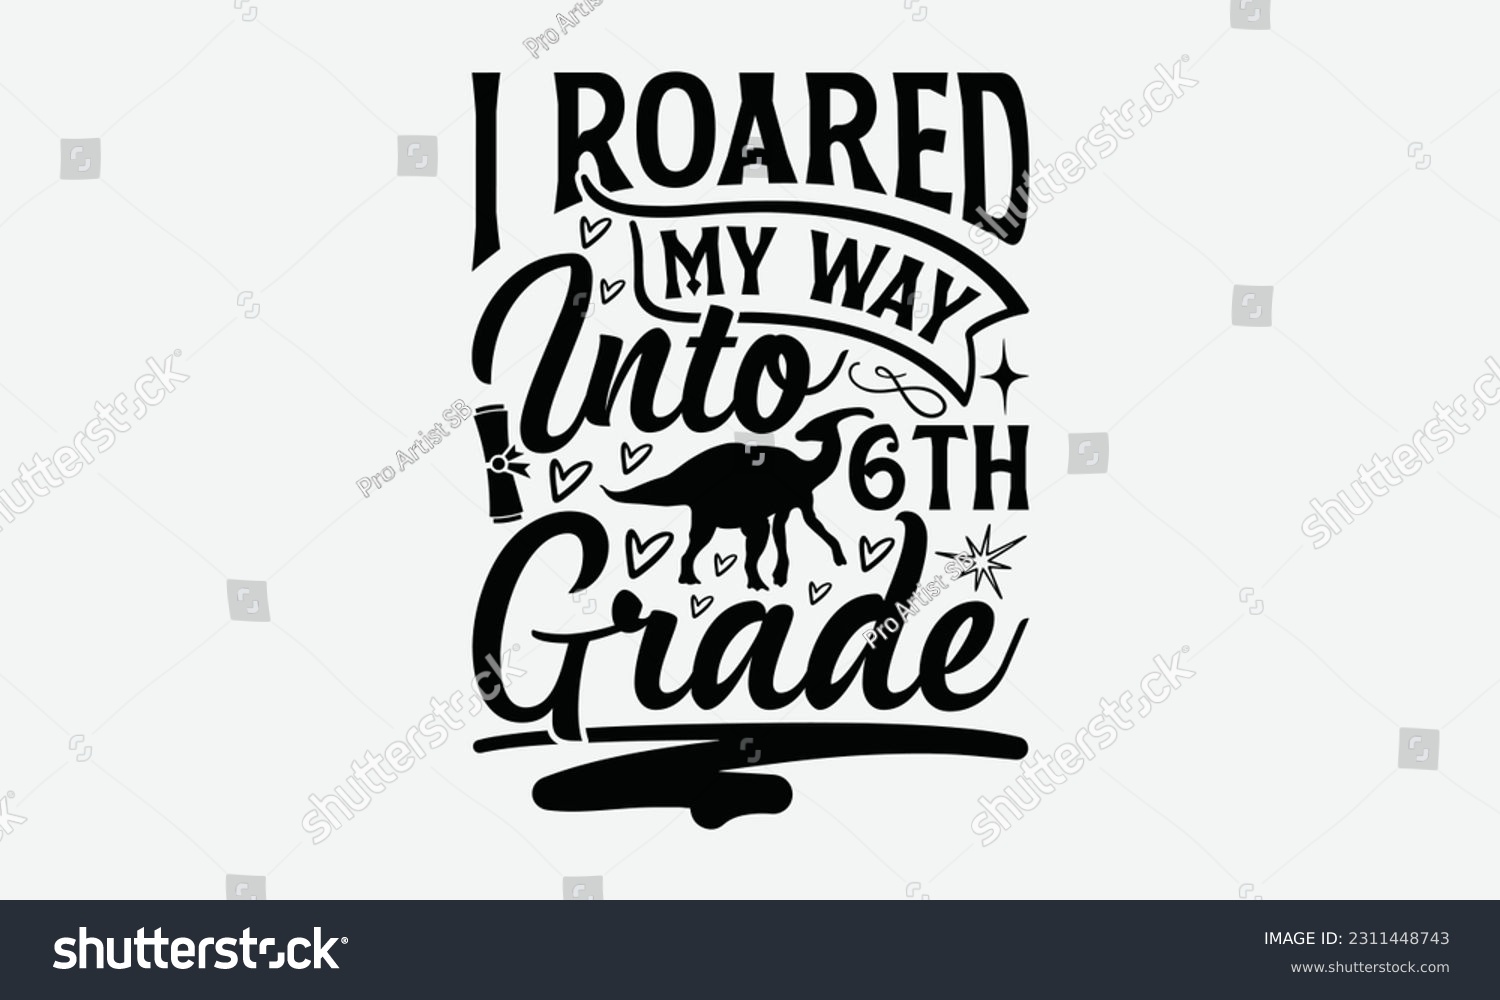 SVG of I Roared My Way Into 6th Grade - Dinosaur SVG Design, Handmade Calligraphy Vector Illustration, And Greeting Card Template With Typography Text. svg